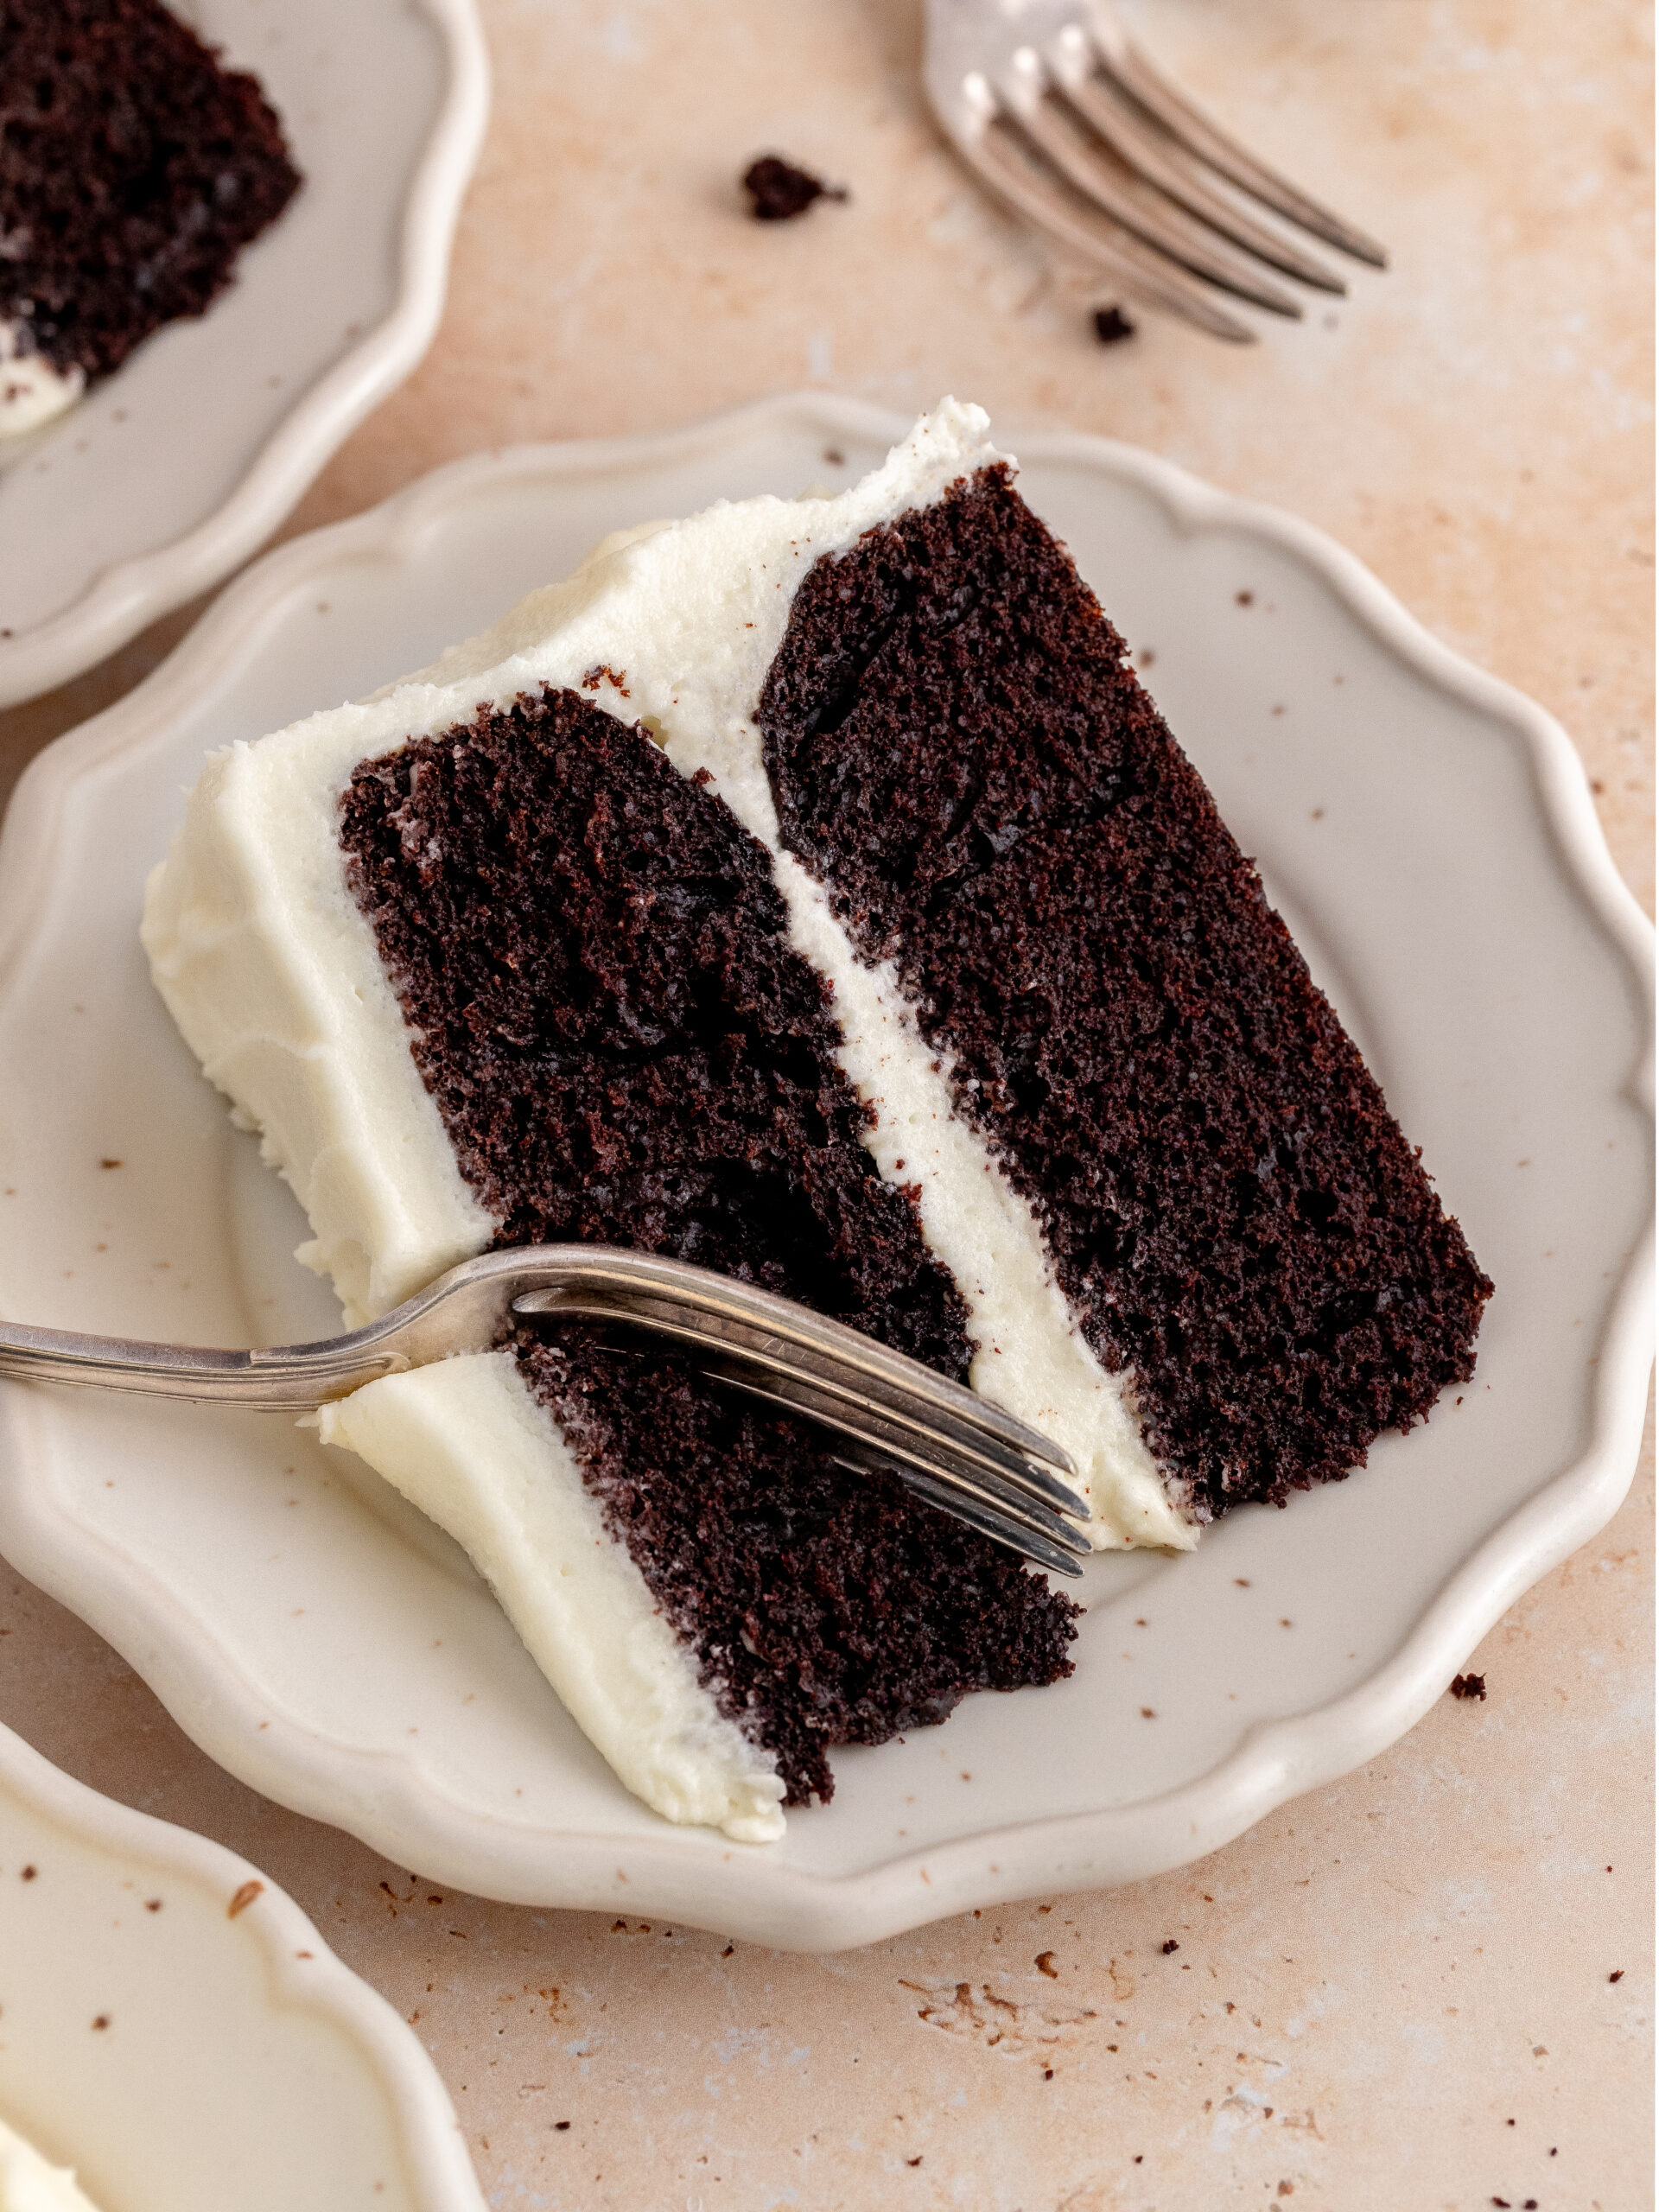 A slice of chocolate cake with cream cheese frosting on a plate.